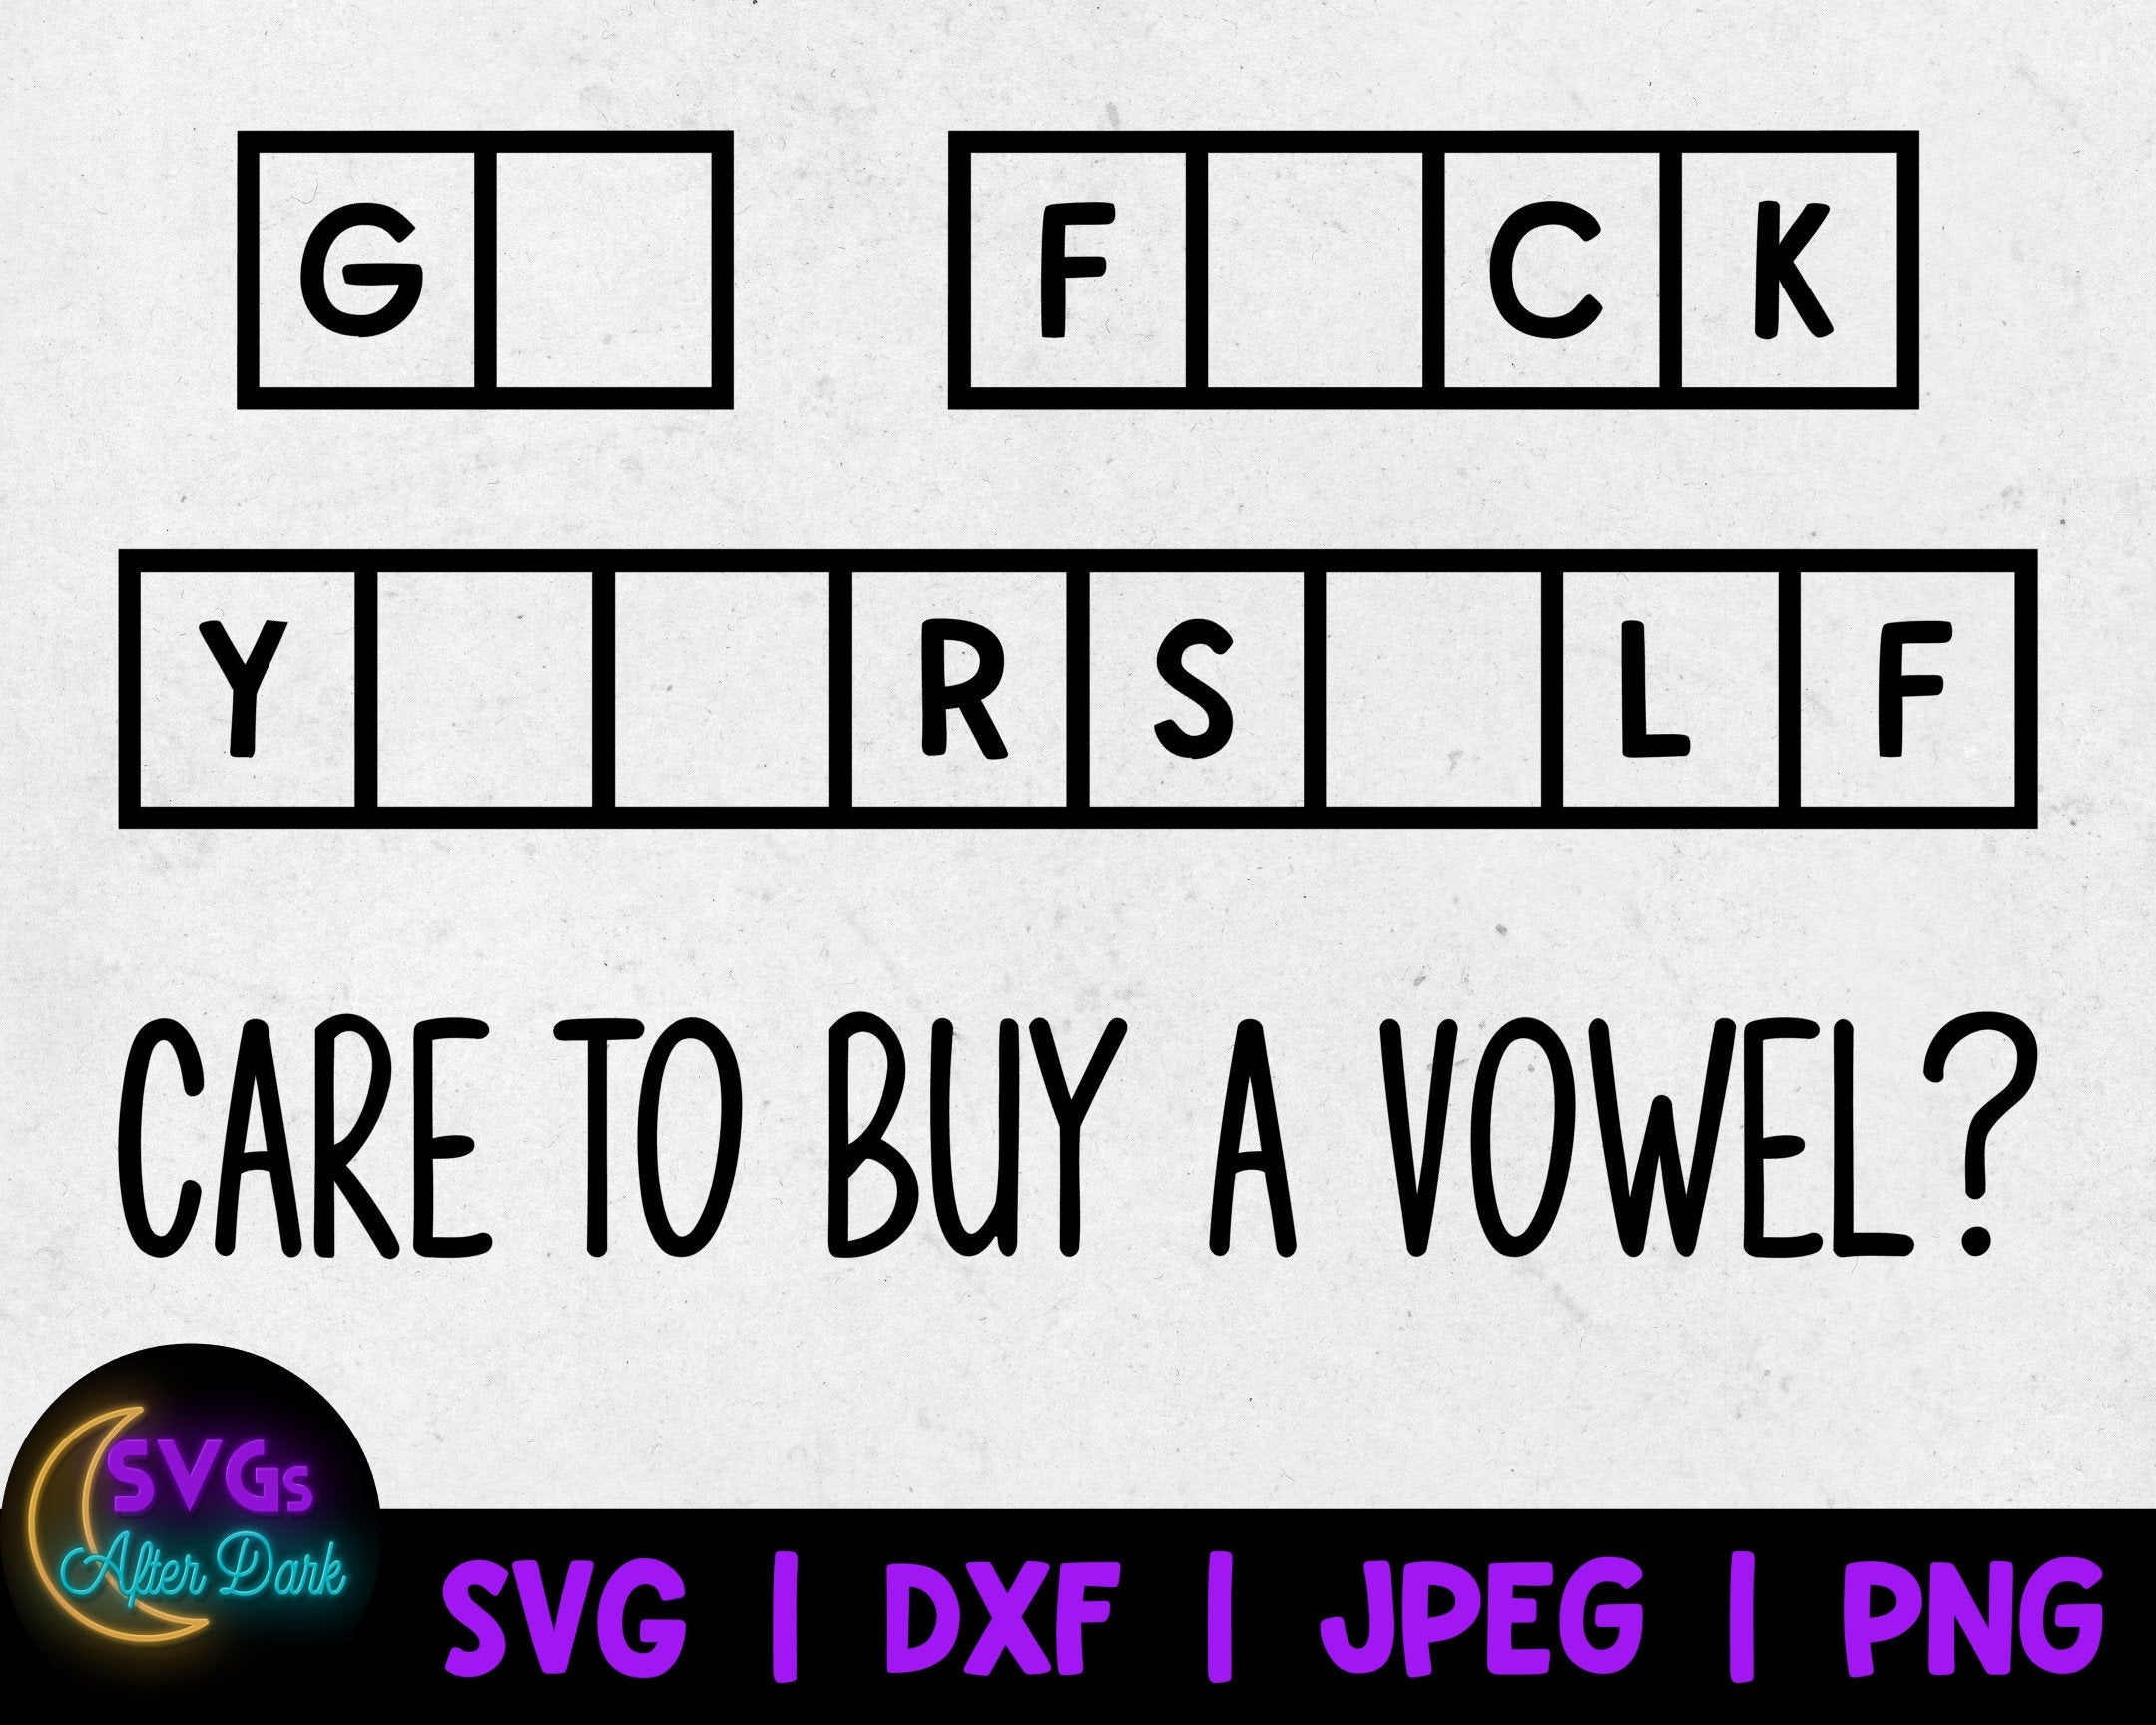 Go Fuck Yourself Care to Buy a Vowel SVG - Fuck Yourself svg - NSFW SVG - Adult Humor Cricut File